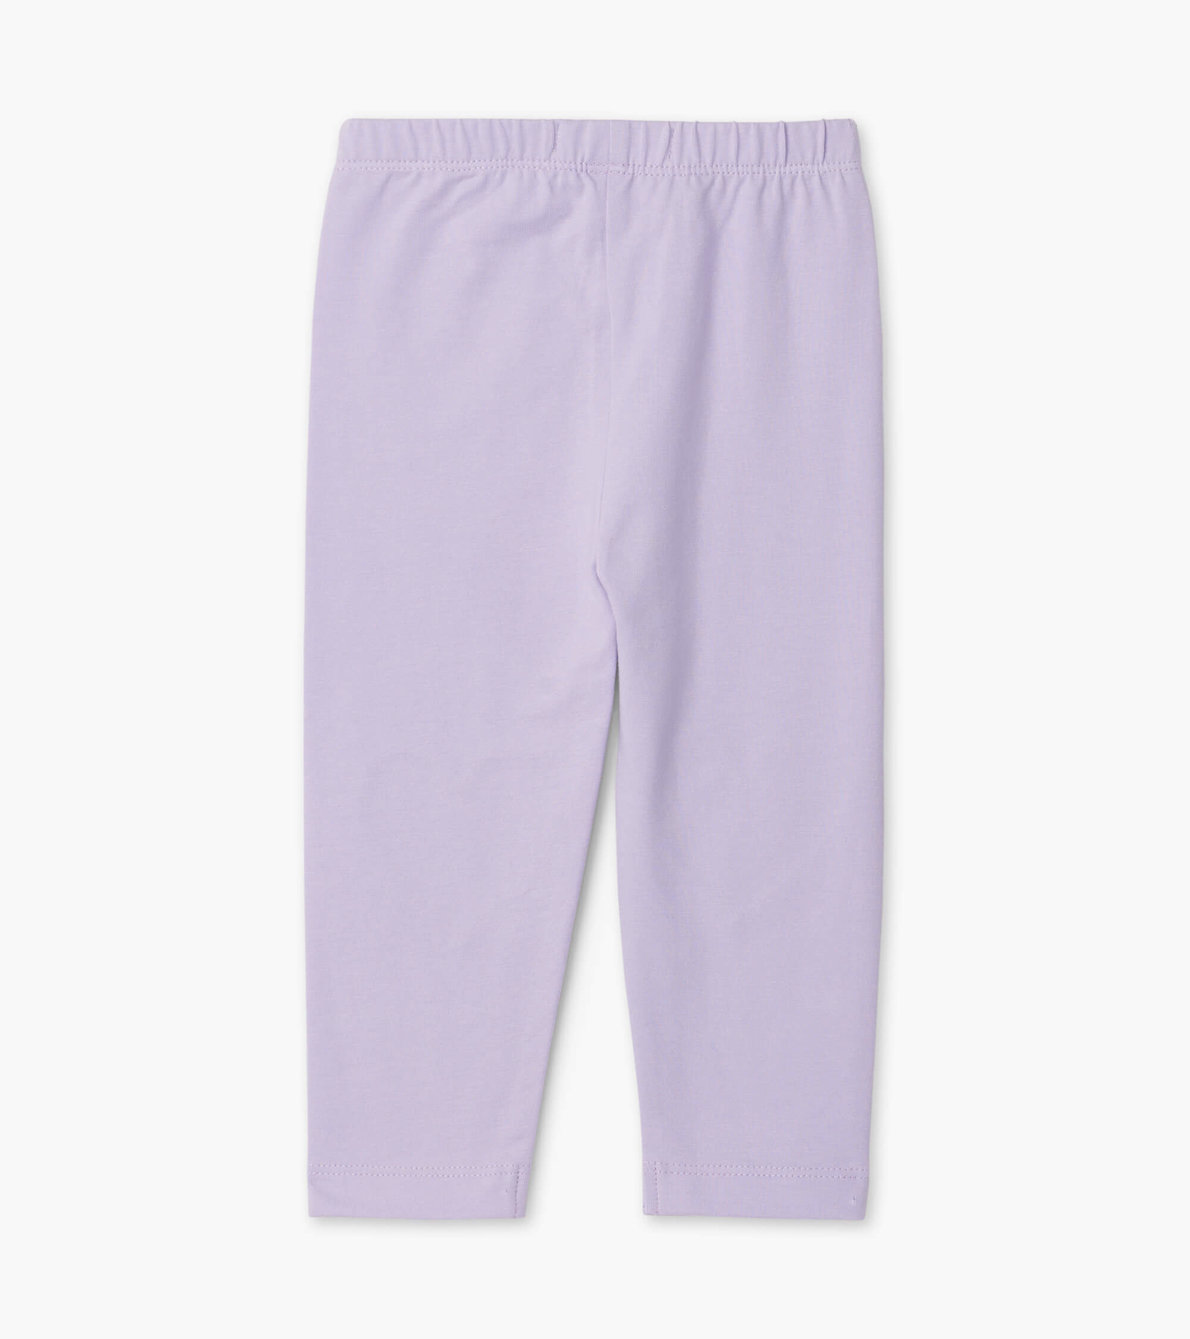 View larger image of Soft Lilac Baby Leggings